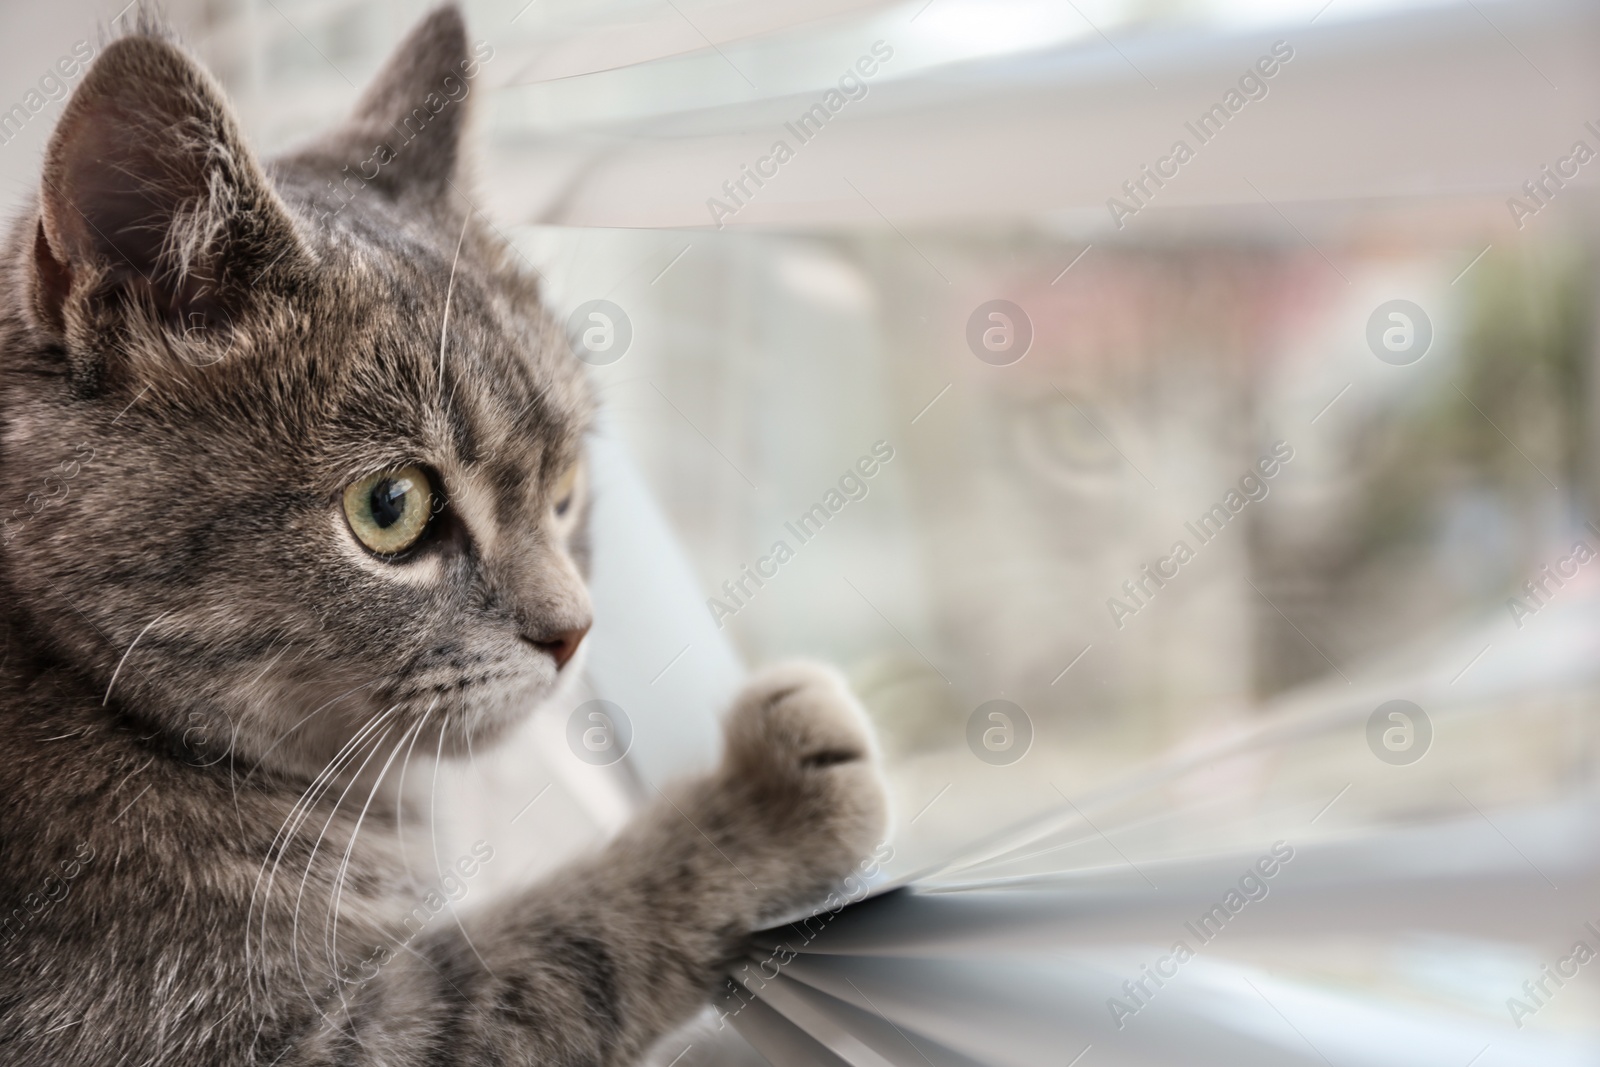 Photo of Cute tabby cat near window with blinds indoors, space for text